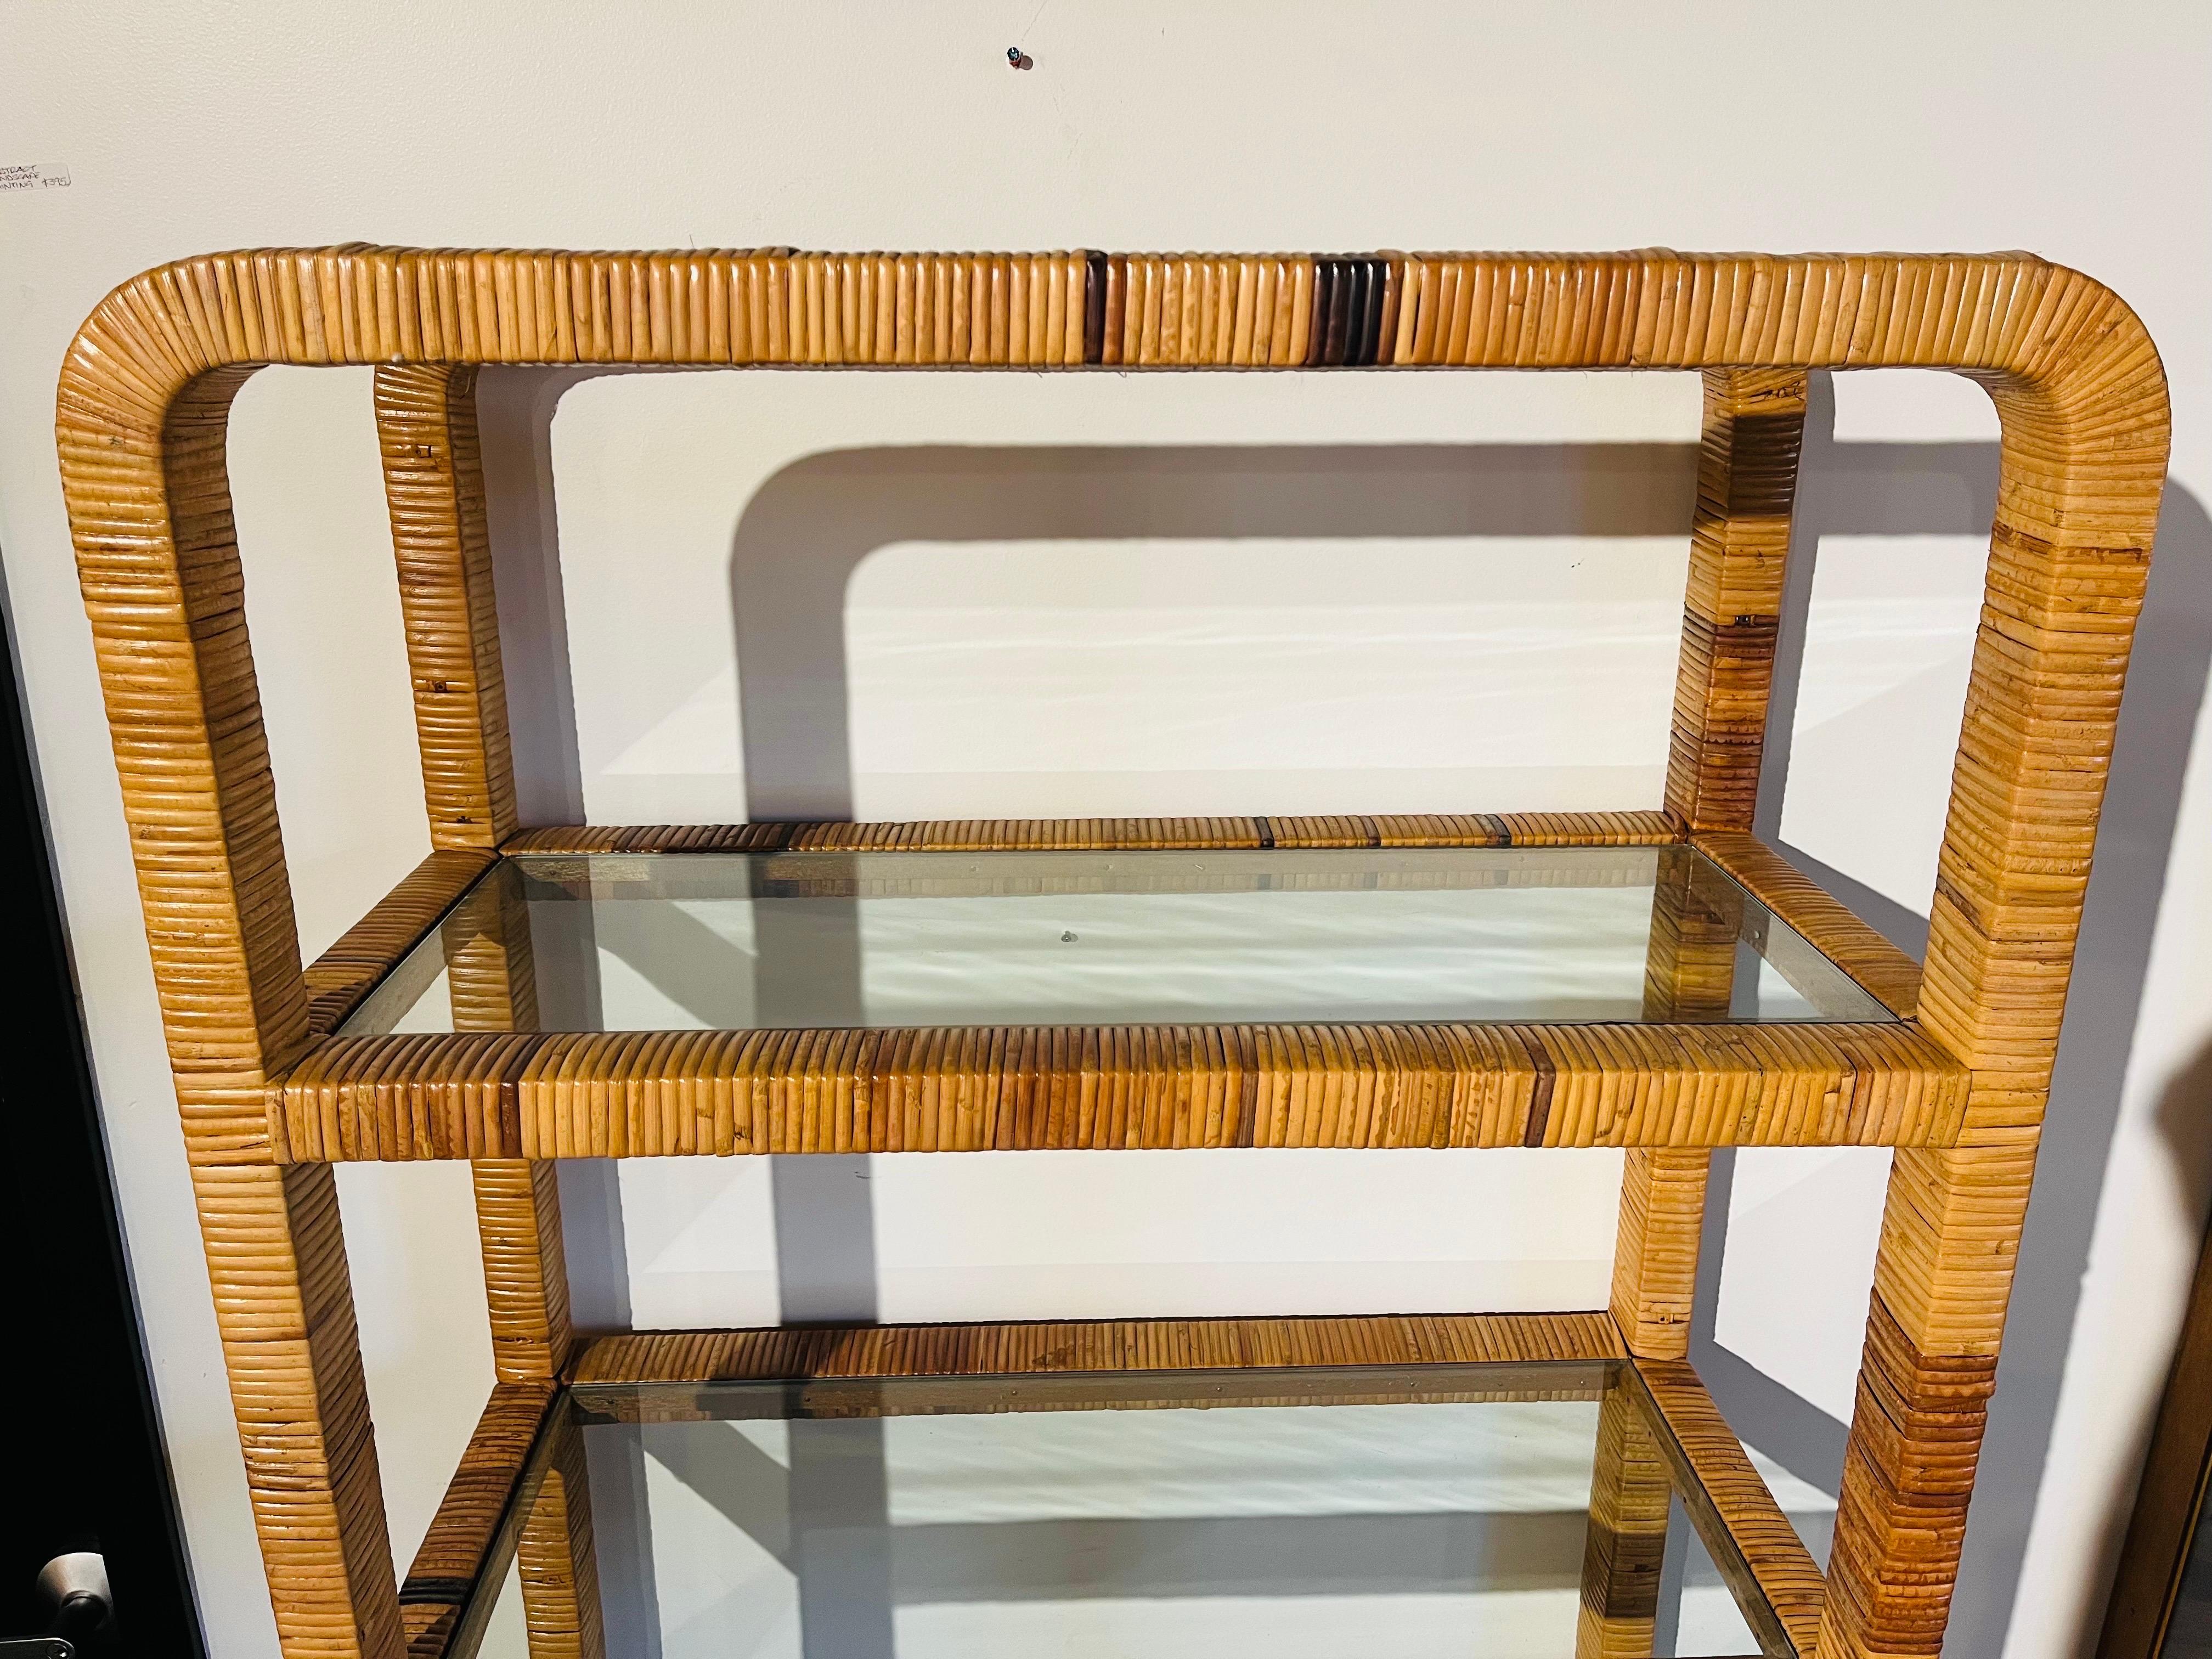 A vintage Bielecky Brothers style wrapped rattan four shelf etagere shelving unit. This piece features a wrapped framework design incorporating rounded corners at both the top and bottom of the etagere as well as on the front and back of the